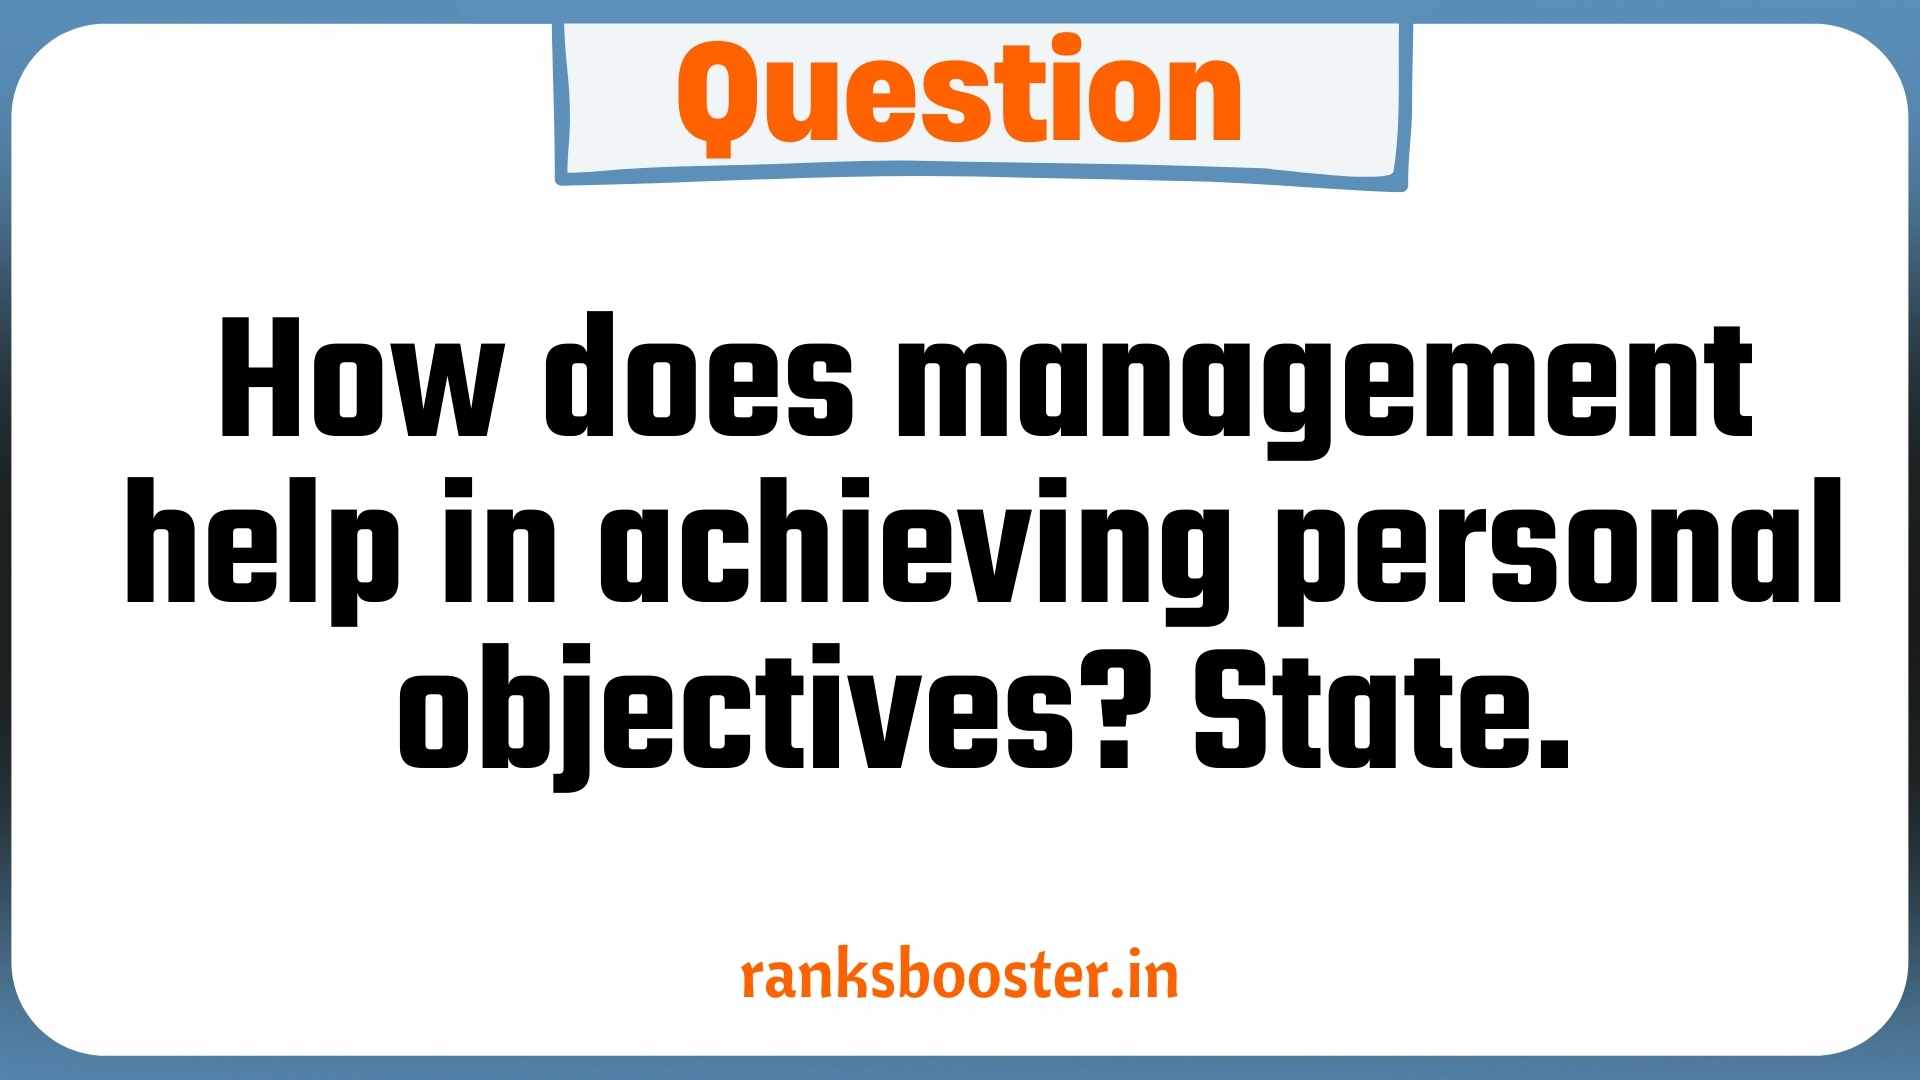 How does management help in achieving personal objectives? State. [CBSE 2015]